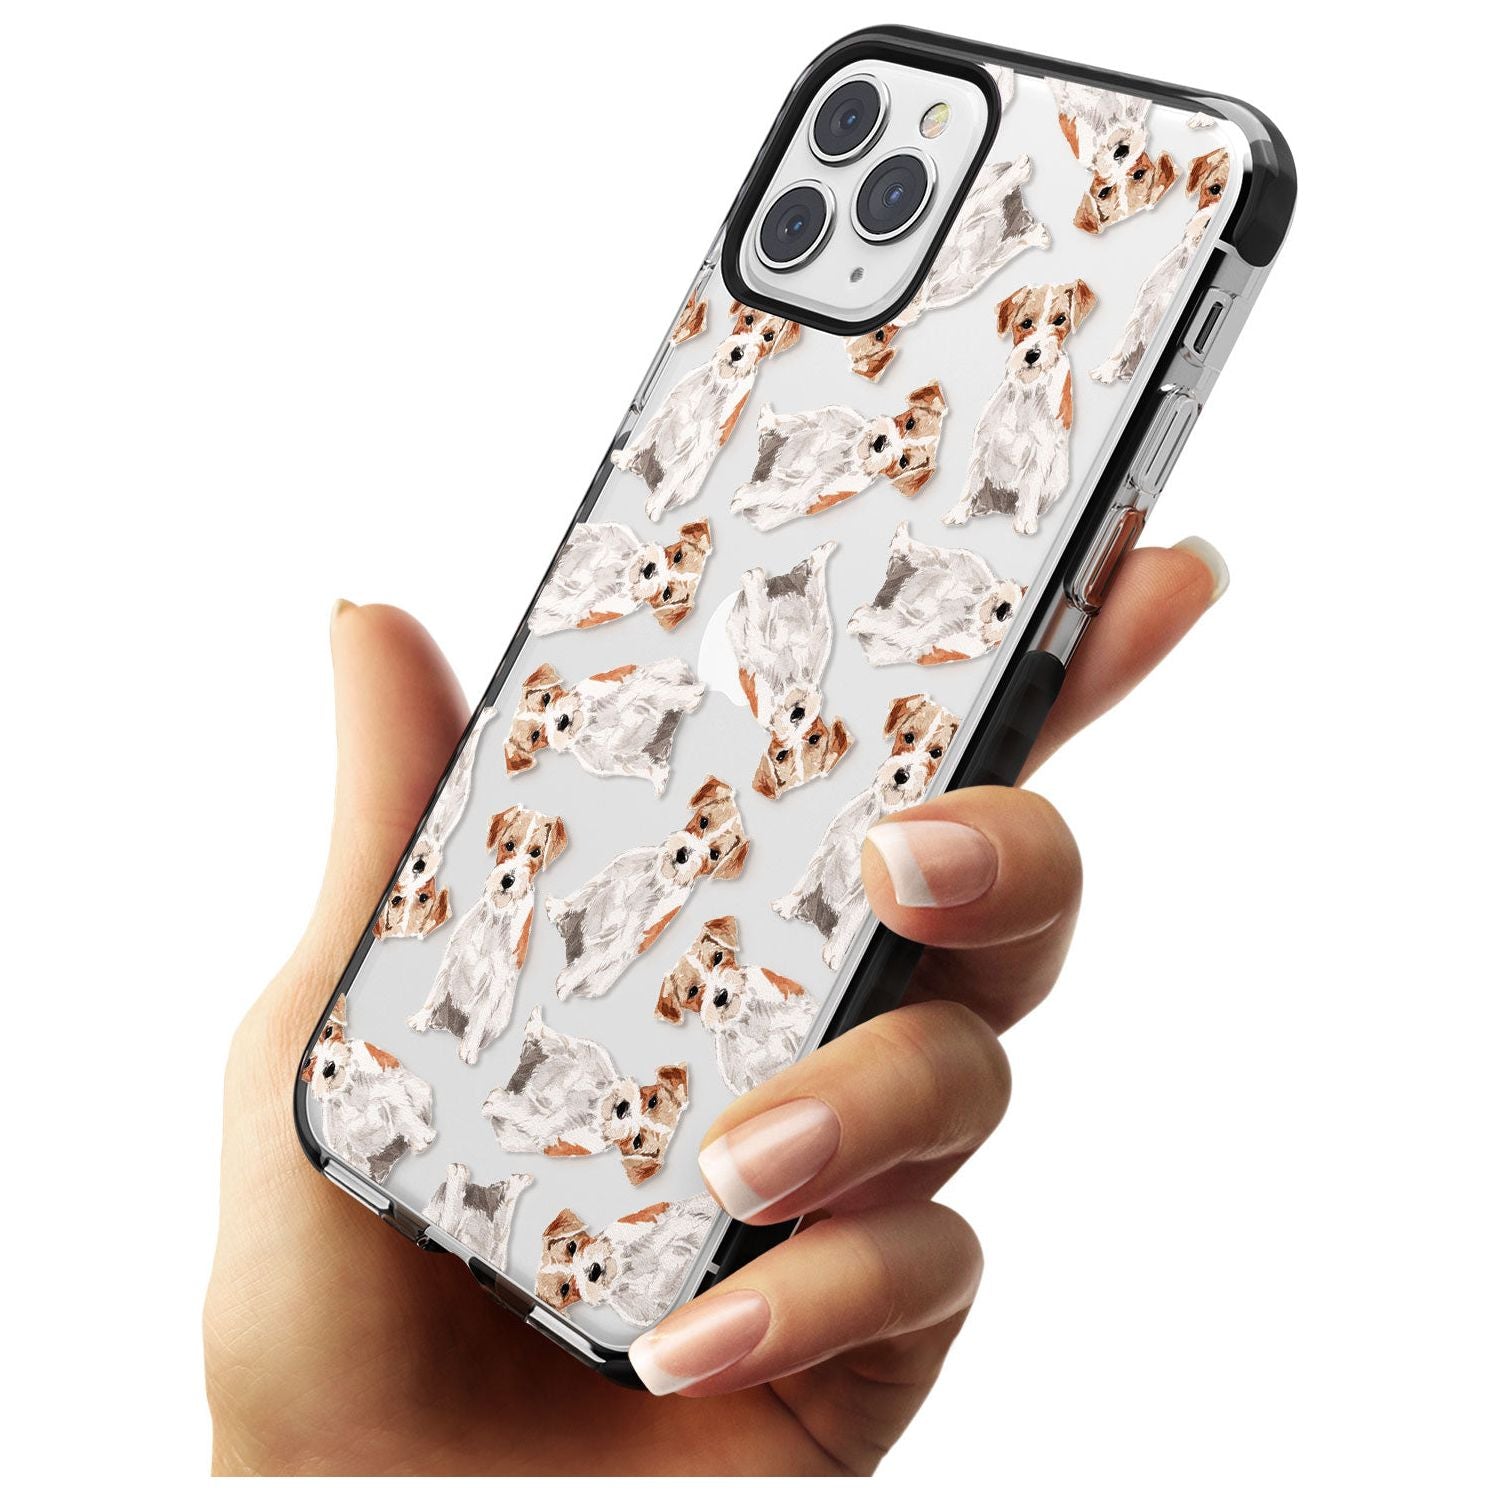 Wirehaired Jack Russell Watercolour Dog Pattern Black Impact Phone Case for iPhone 11 Pro Max